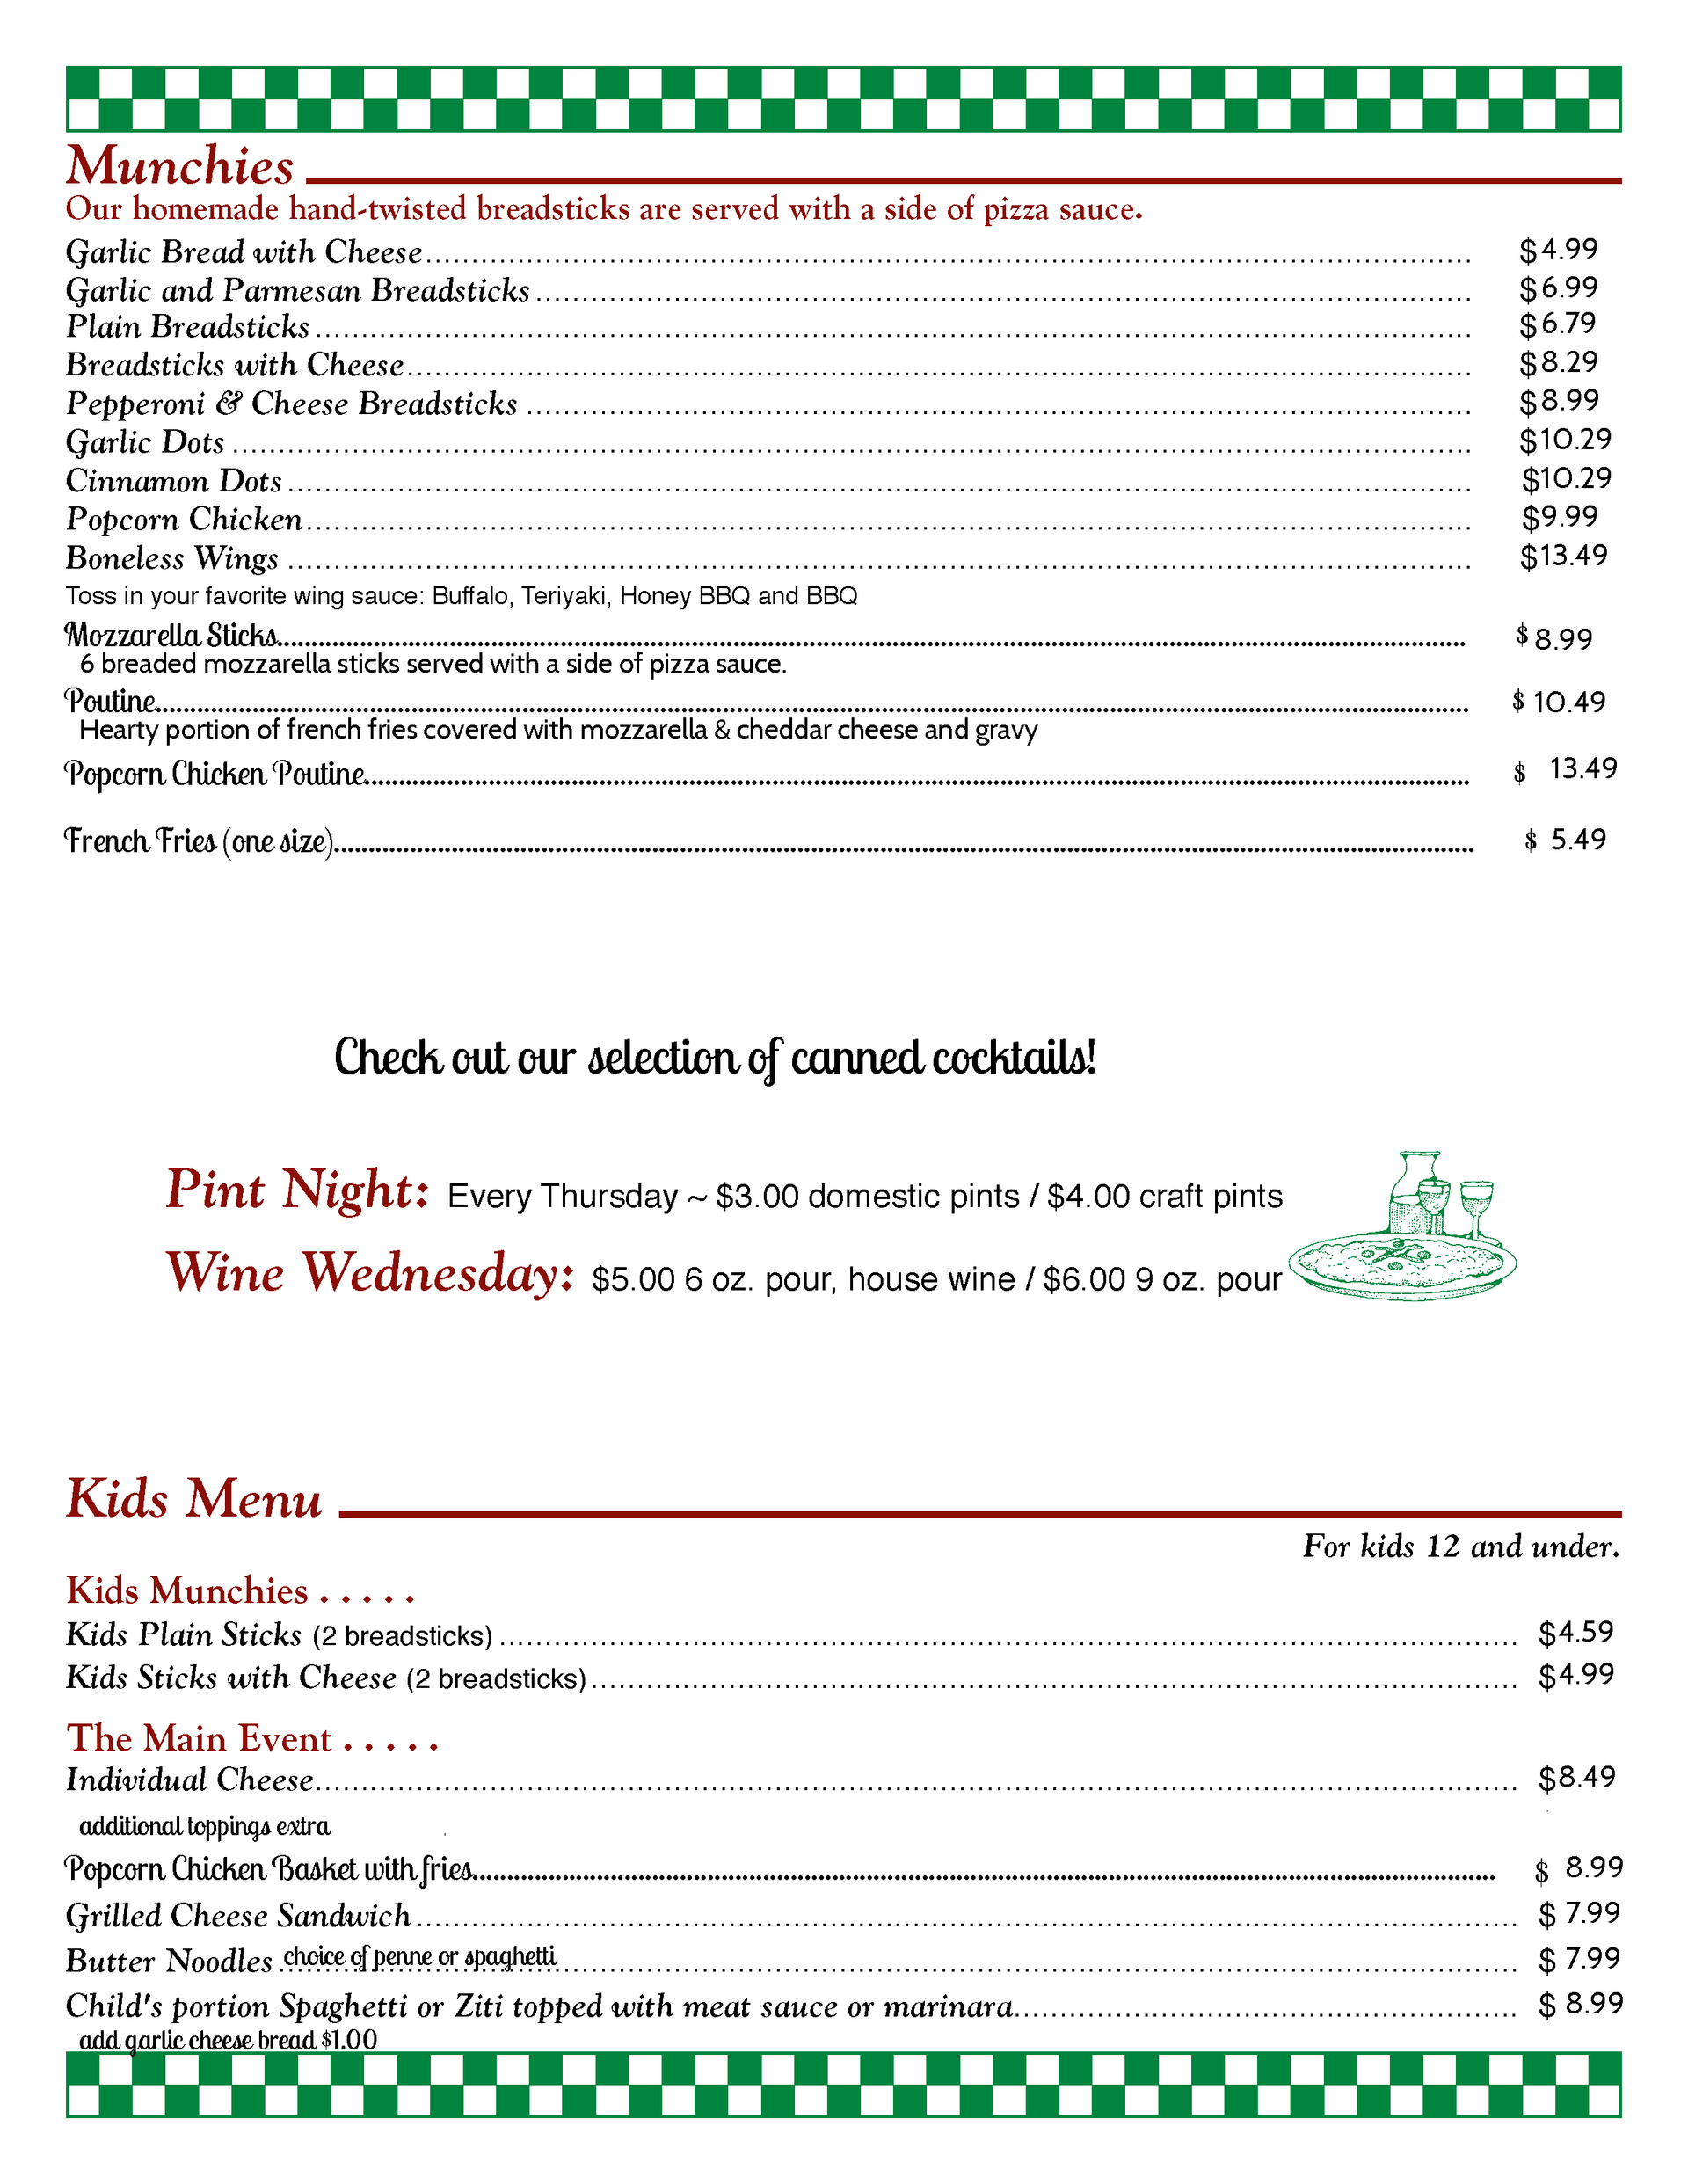 Hoagie's pizza and pasta menu page 5